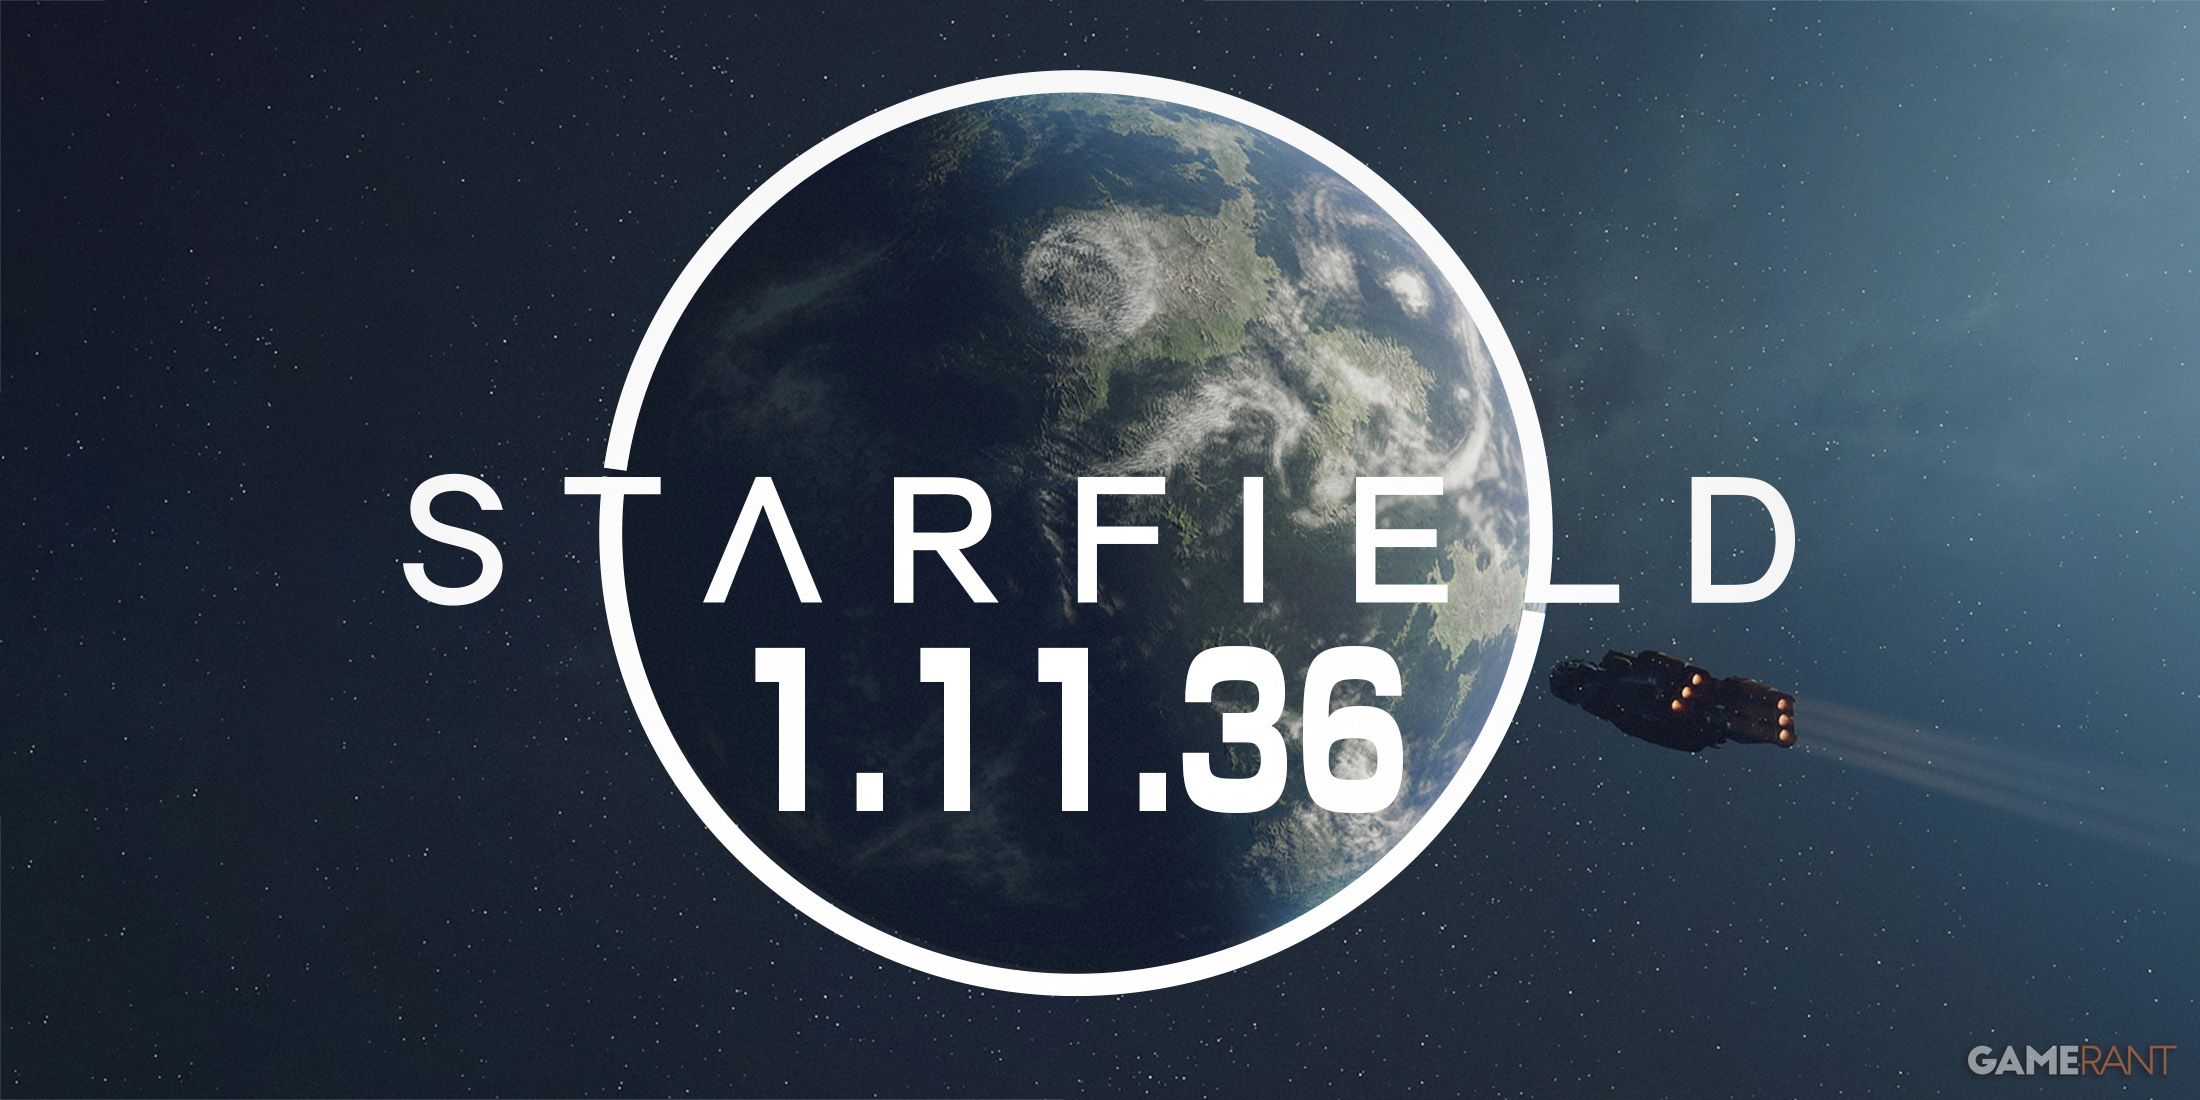 Starfield Update 1.11.36 logo version number around planet being approached by Frontier ship space composite